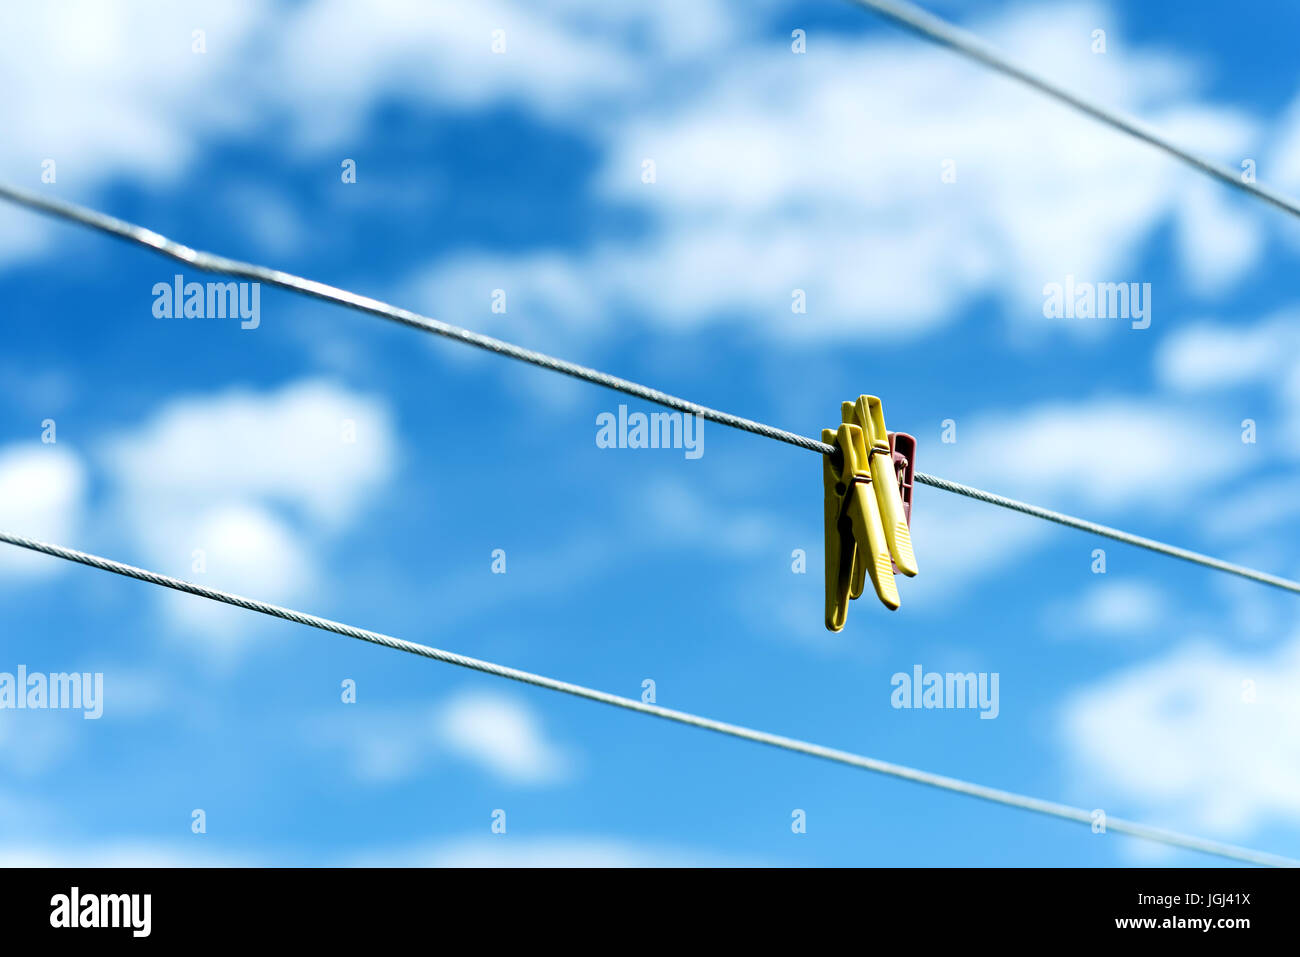 Three brightly colored plastic clothes pegs on a  family washing line with blue sky and white summer clouds in the background Stock Photo